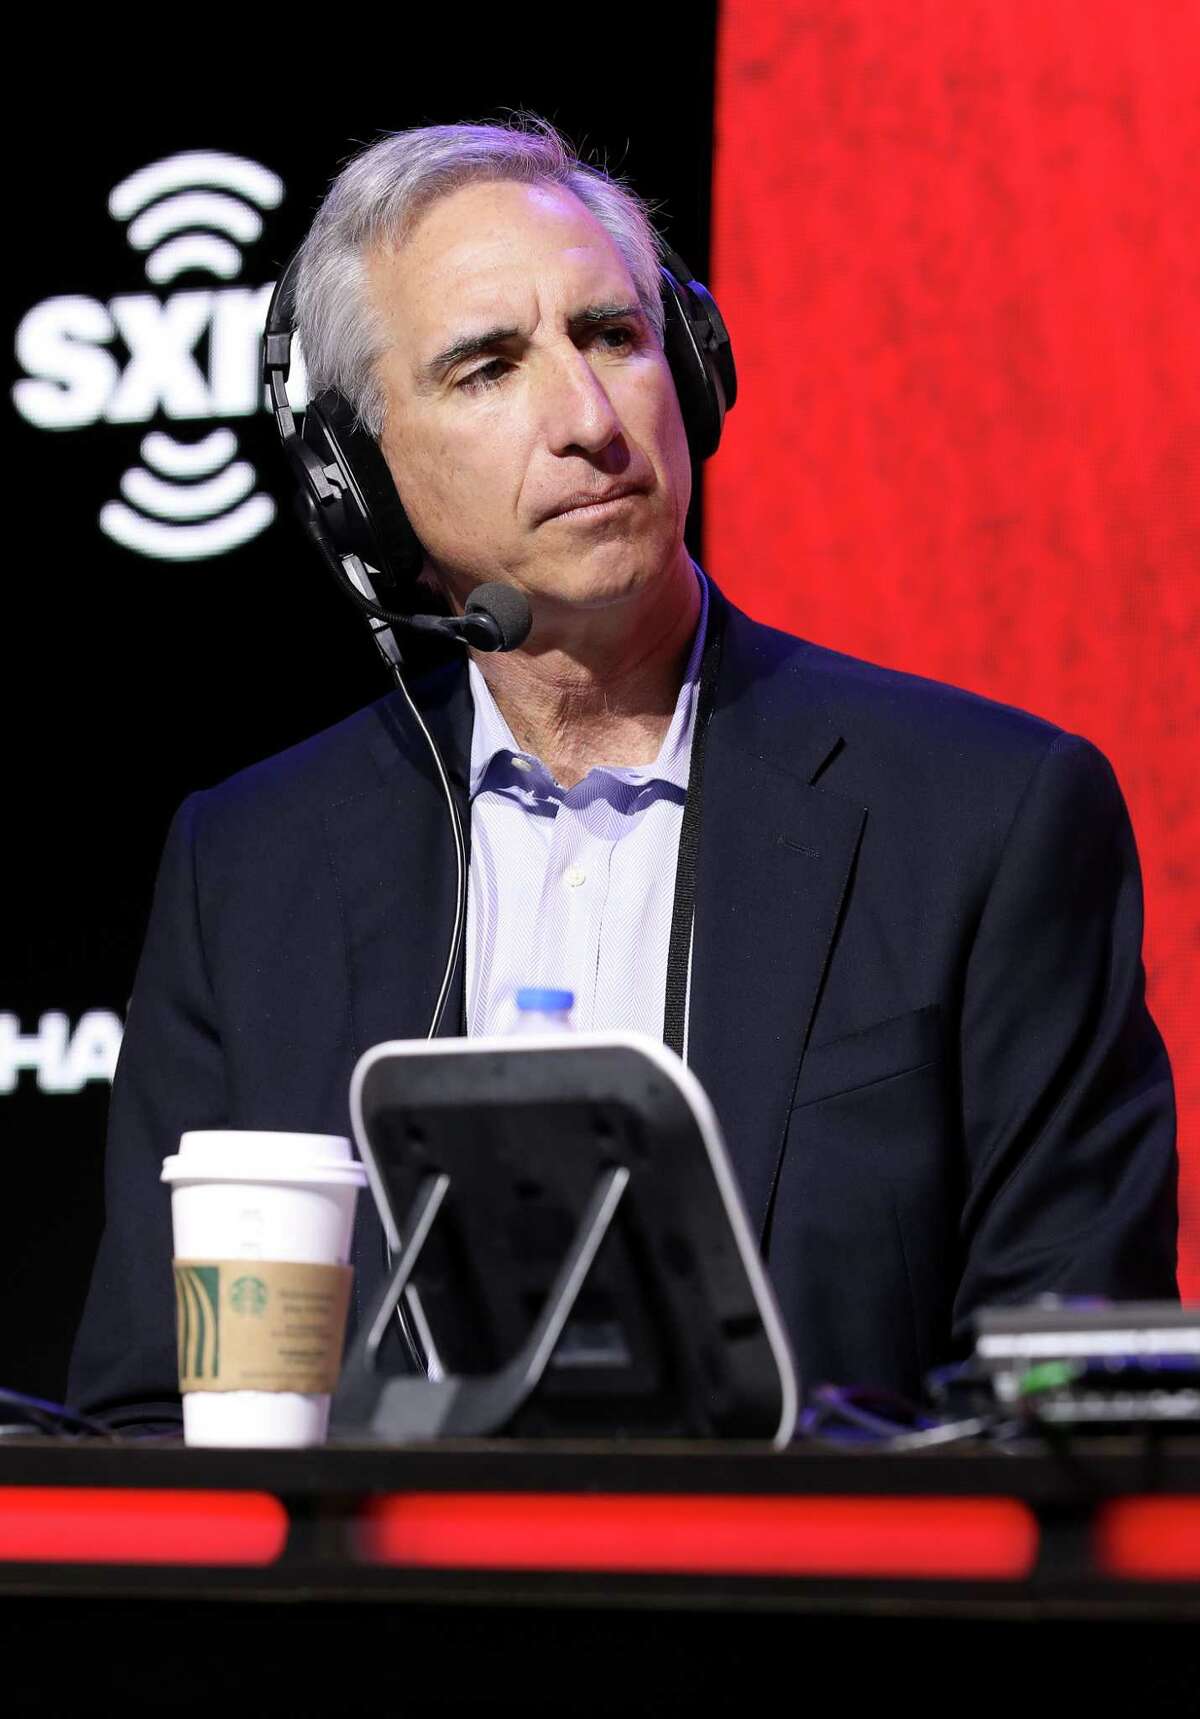 MIAMI, FLORIDA - JANUARY 30: CEO of XFL Oliver Luck speaks onstage during day 2 of SiriusXM at Super Bowl LIV on January 30, 2020 in Miami, Florida. (Photo by Cindy Ord/Getty Images for SiriusXM )